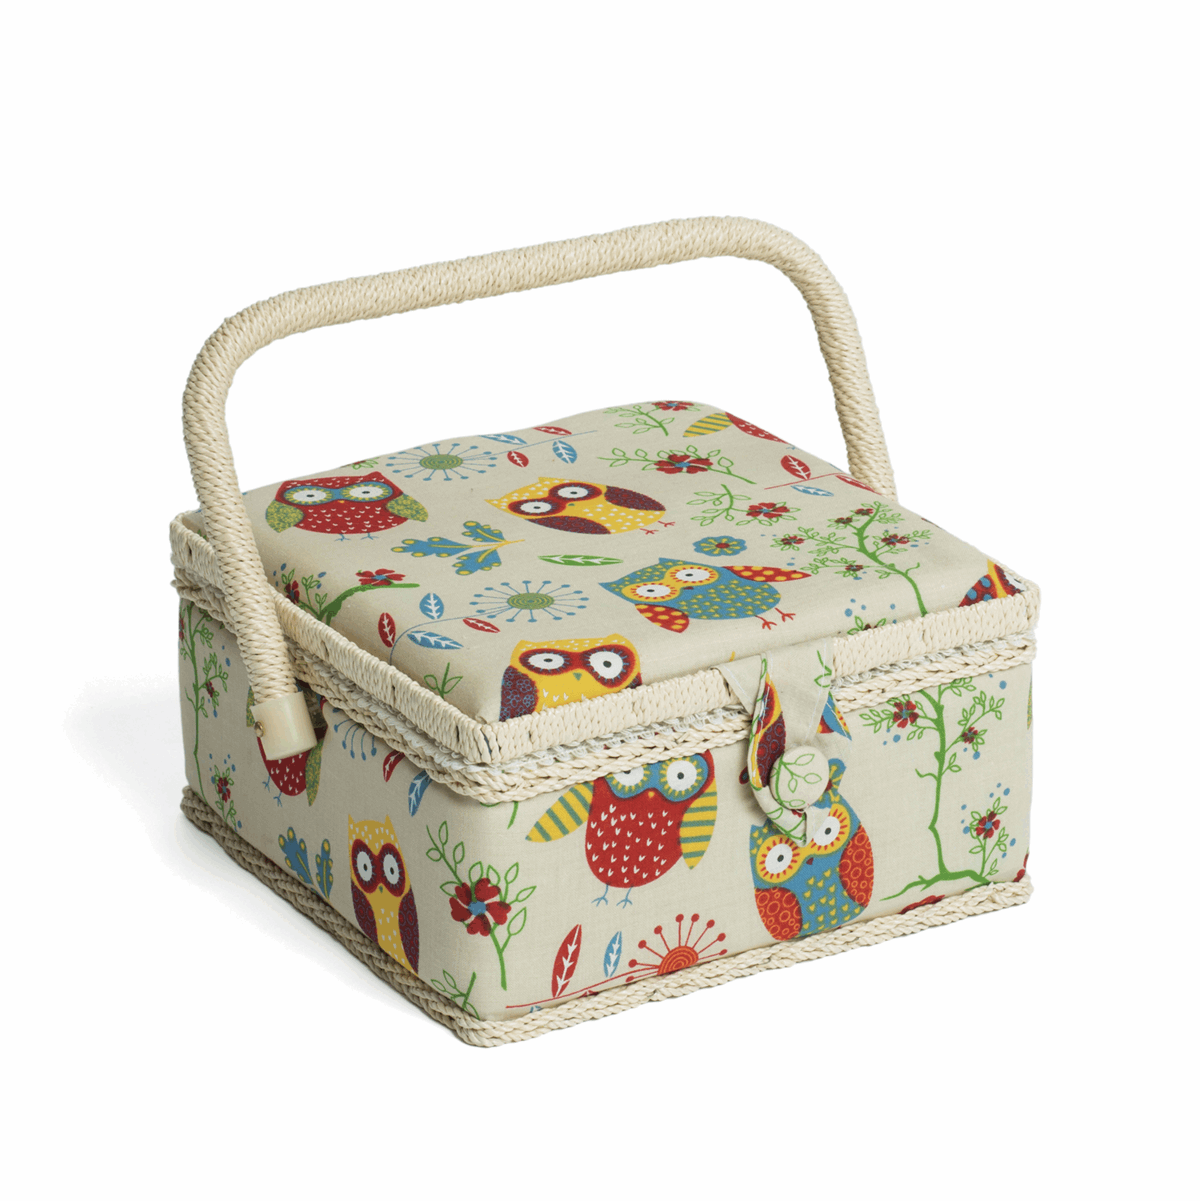 Owl Sewing Box - Small Square